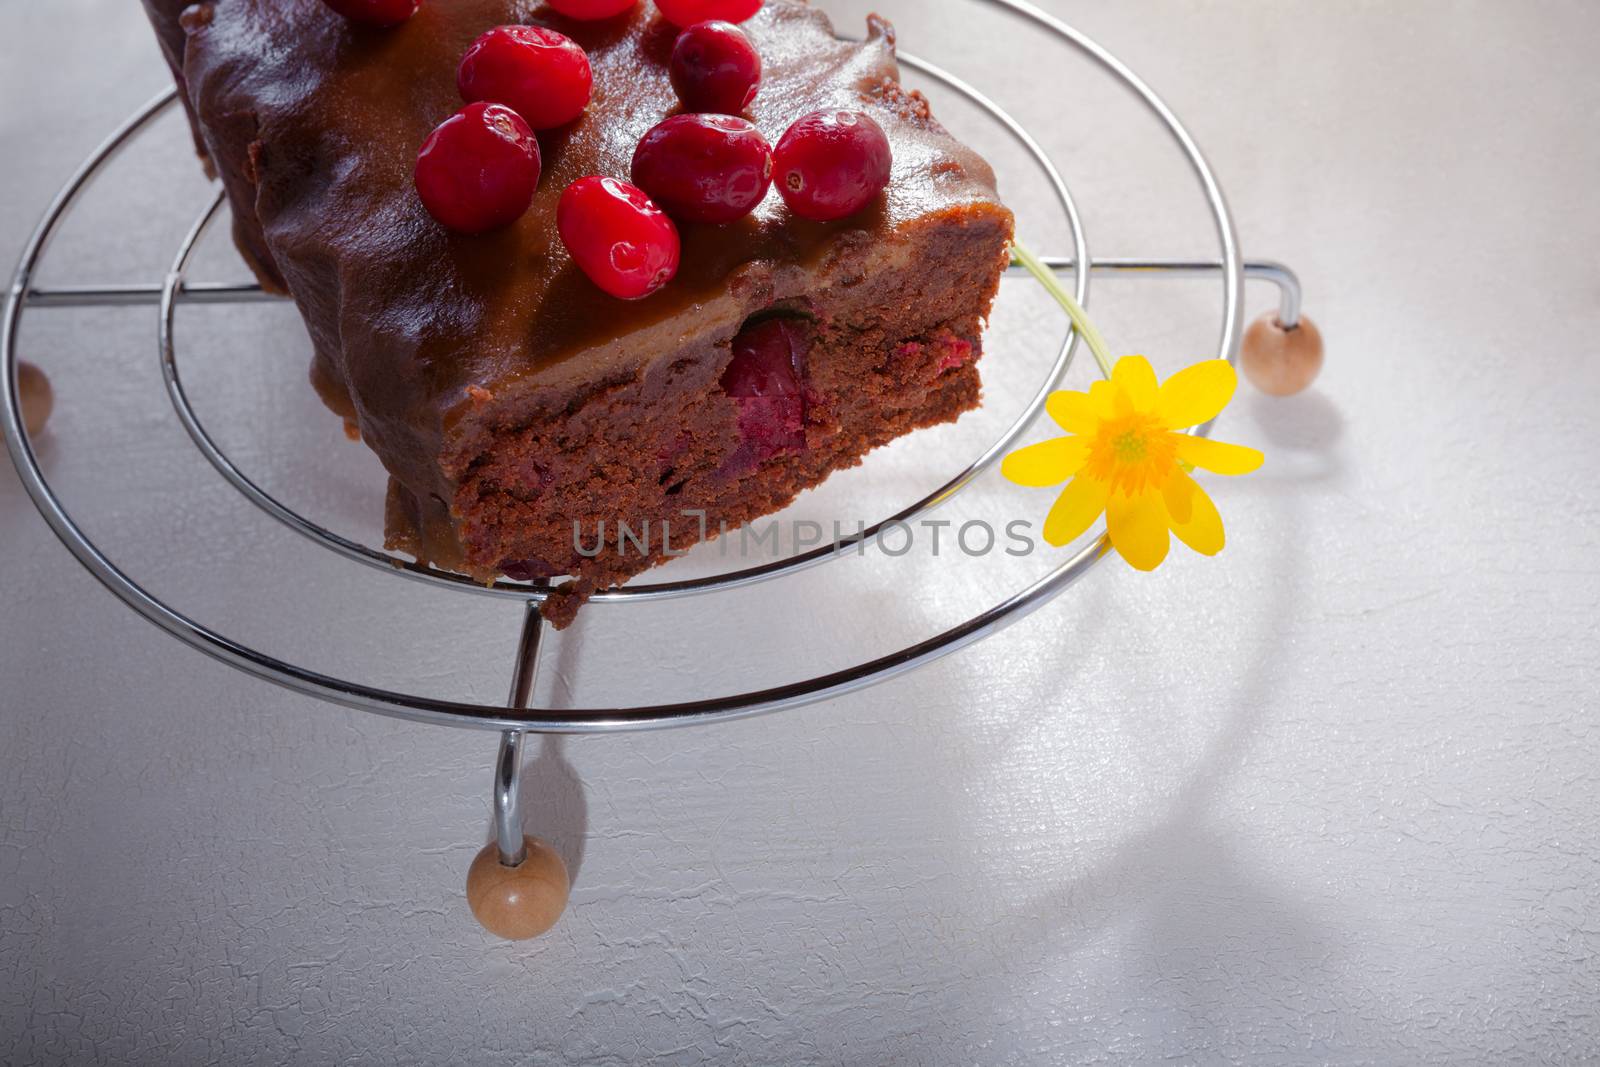 Chocolate and caramel cake with cranberries on a table